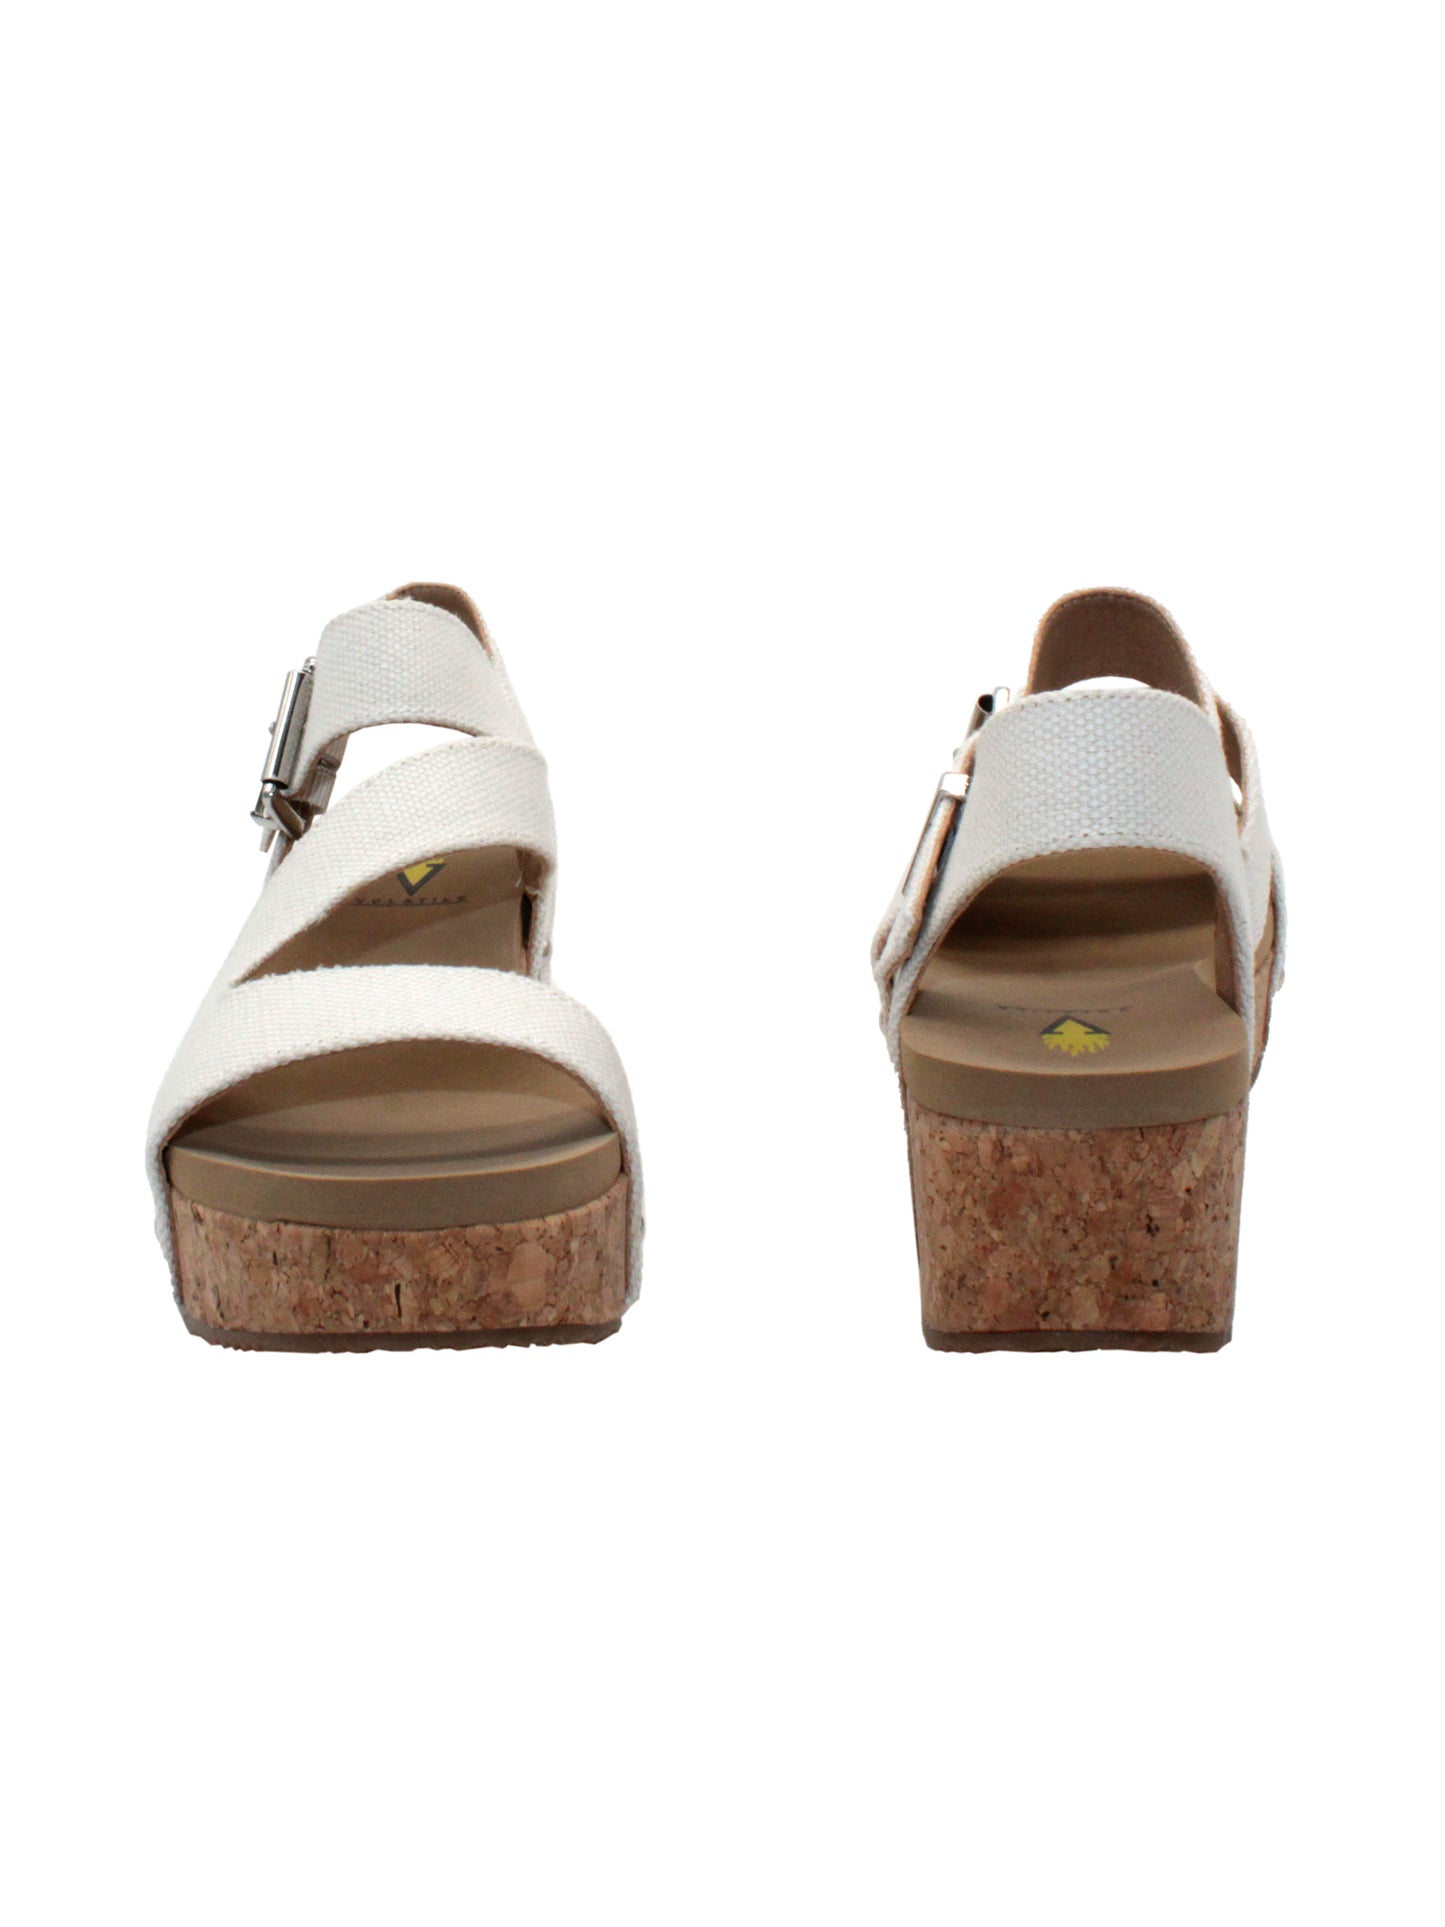 Vegan leather or heavy canvas asymmetrical upper Synthetic lining Adjustable metal buckle and metal clog studs Asymmetrical sandal with back strap Ultra comfort EVA insole Cork wedge Rubber traction outsole Approx. 2” heel height ivory front and back